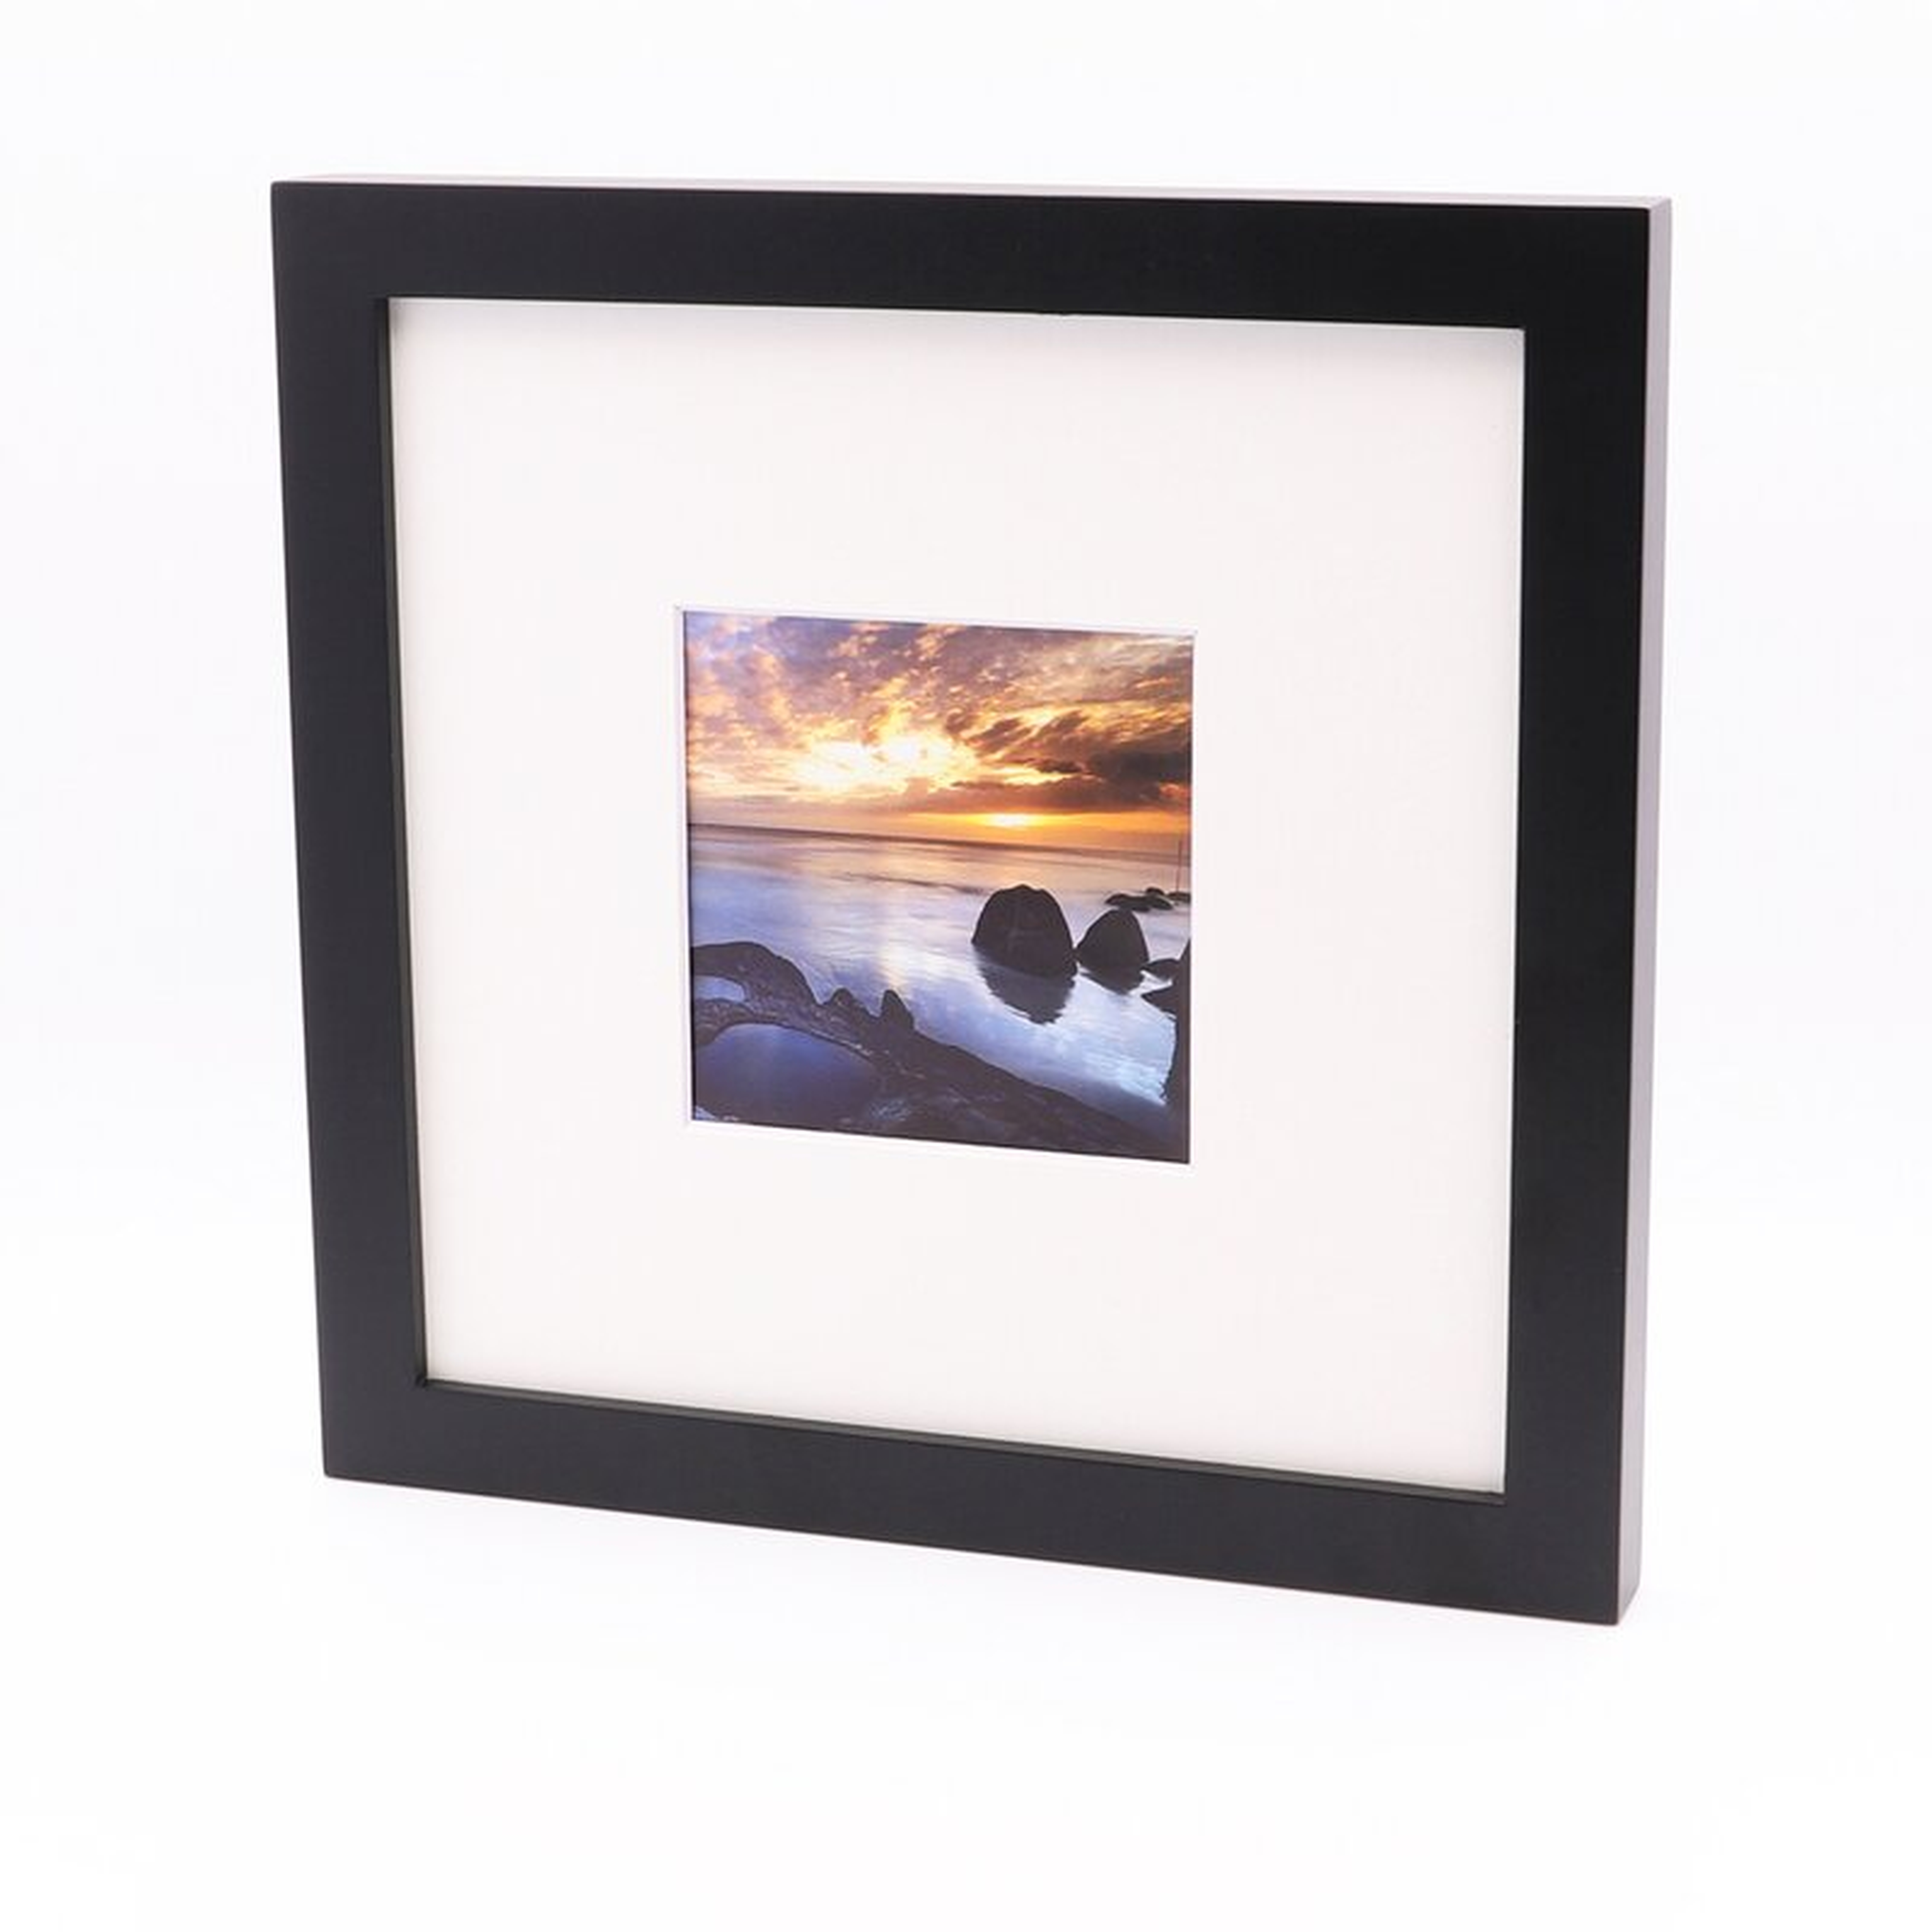 Gibrilla Square Wood Picture Frame - Wayfair